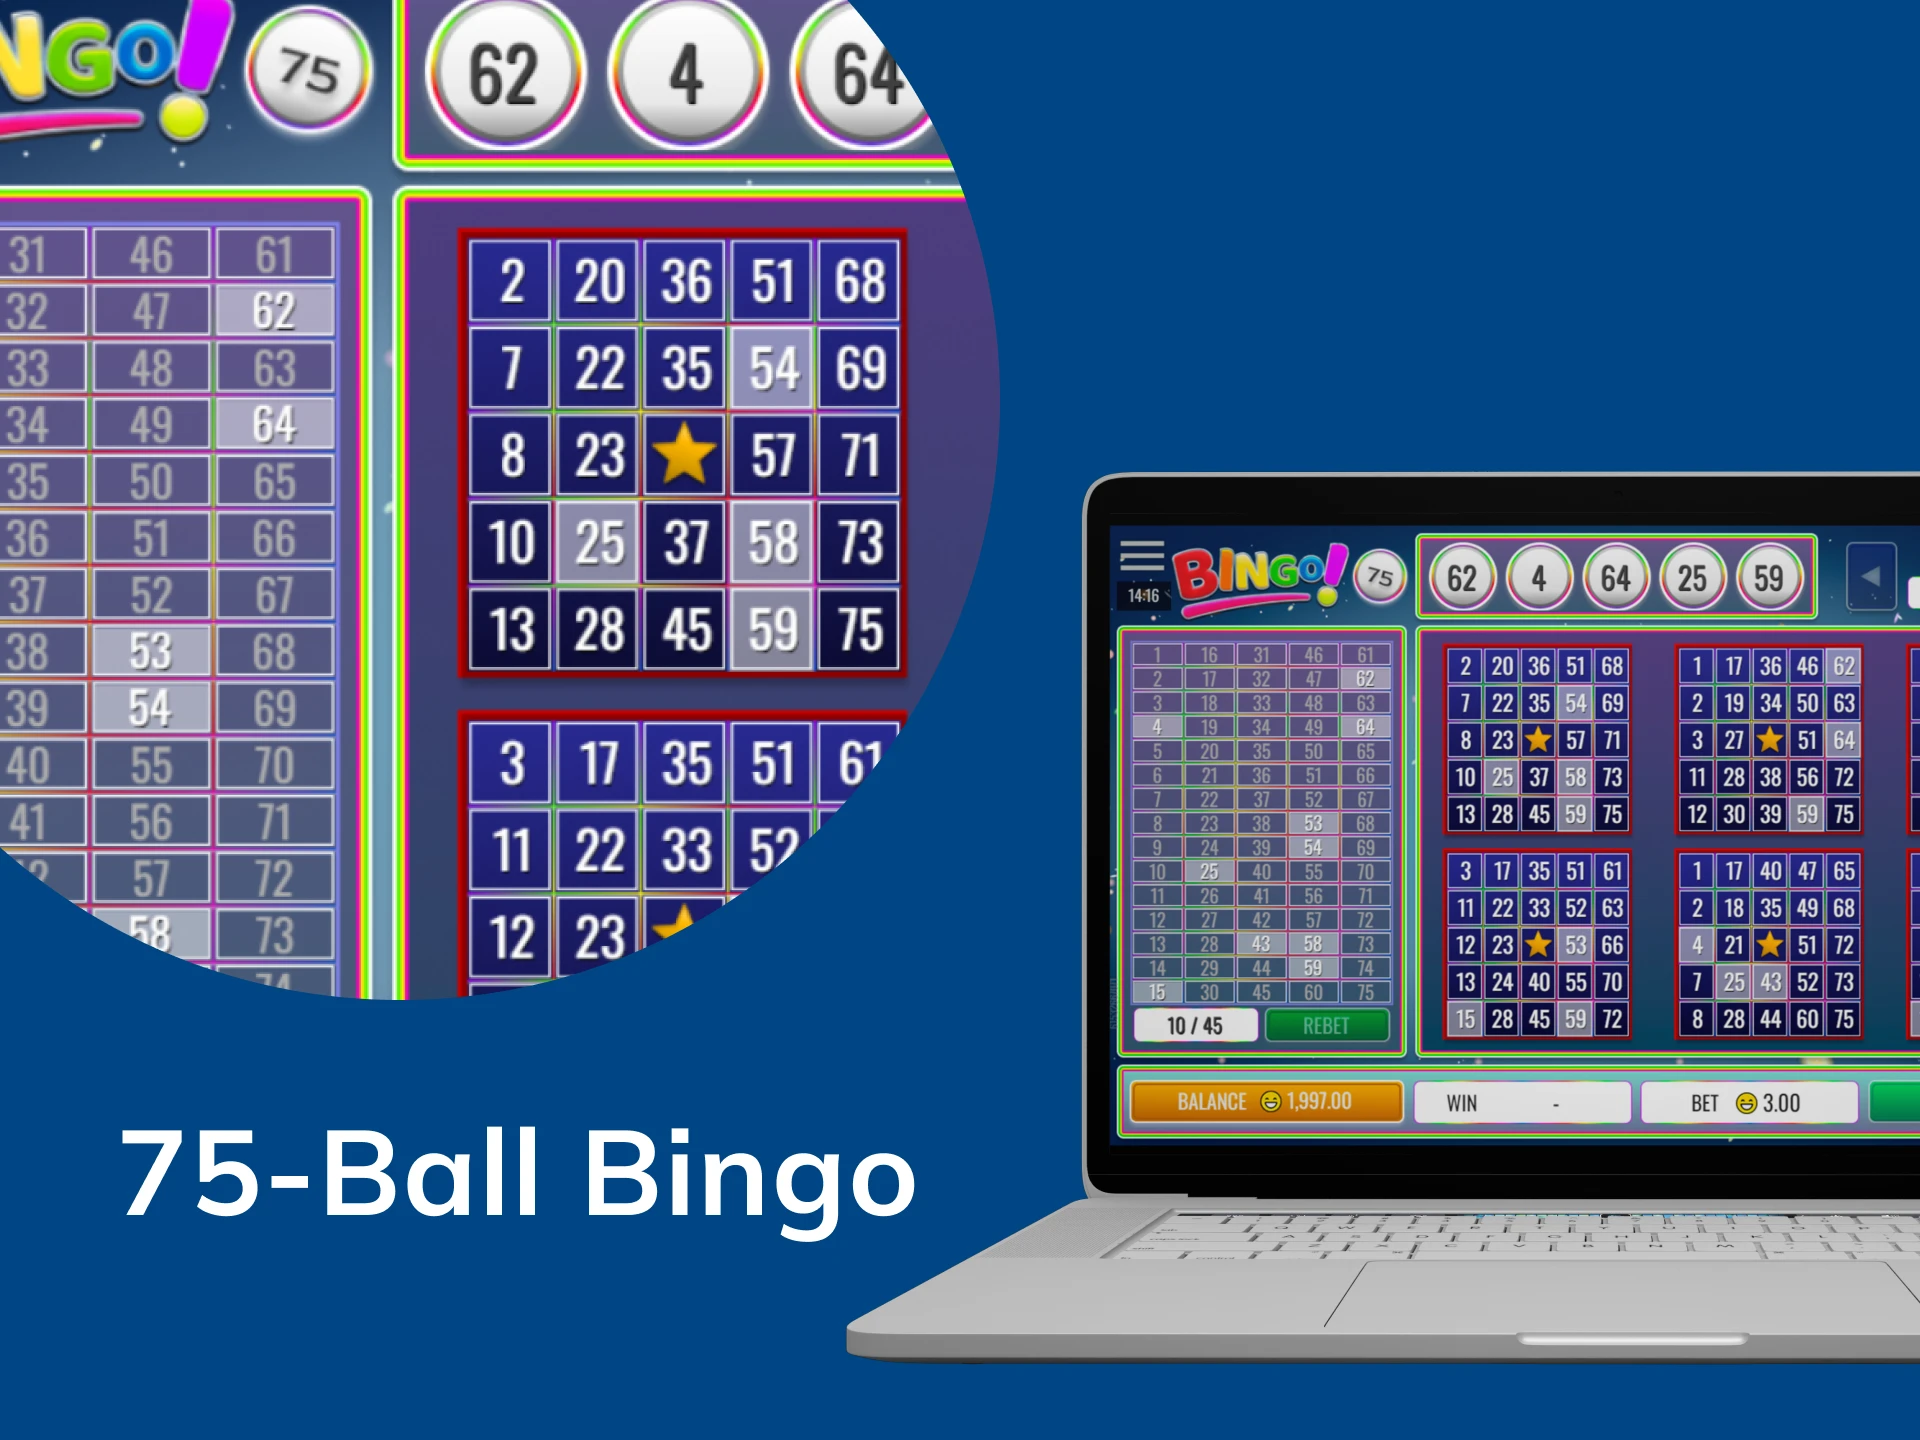 Try your hand at the 75-ball bingo.